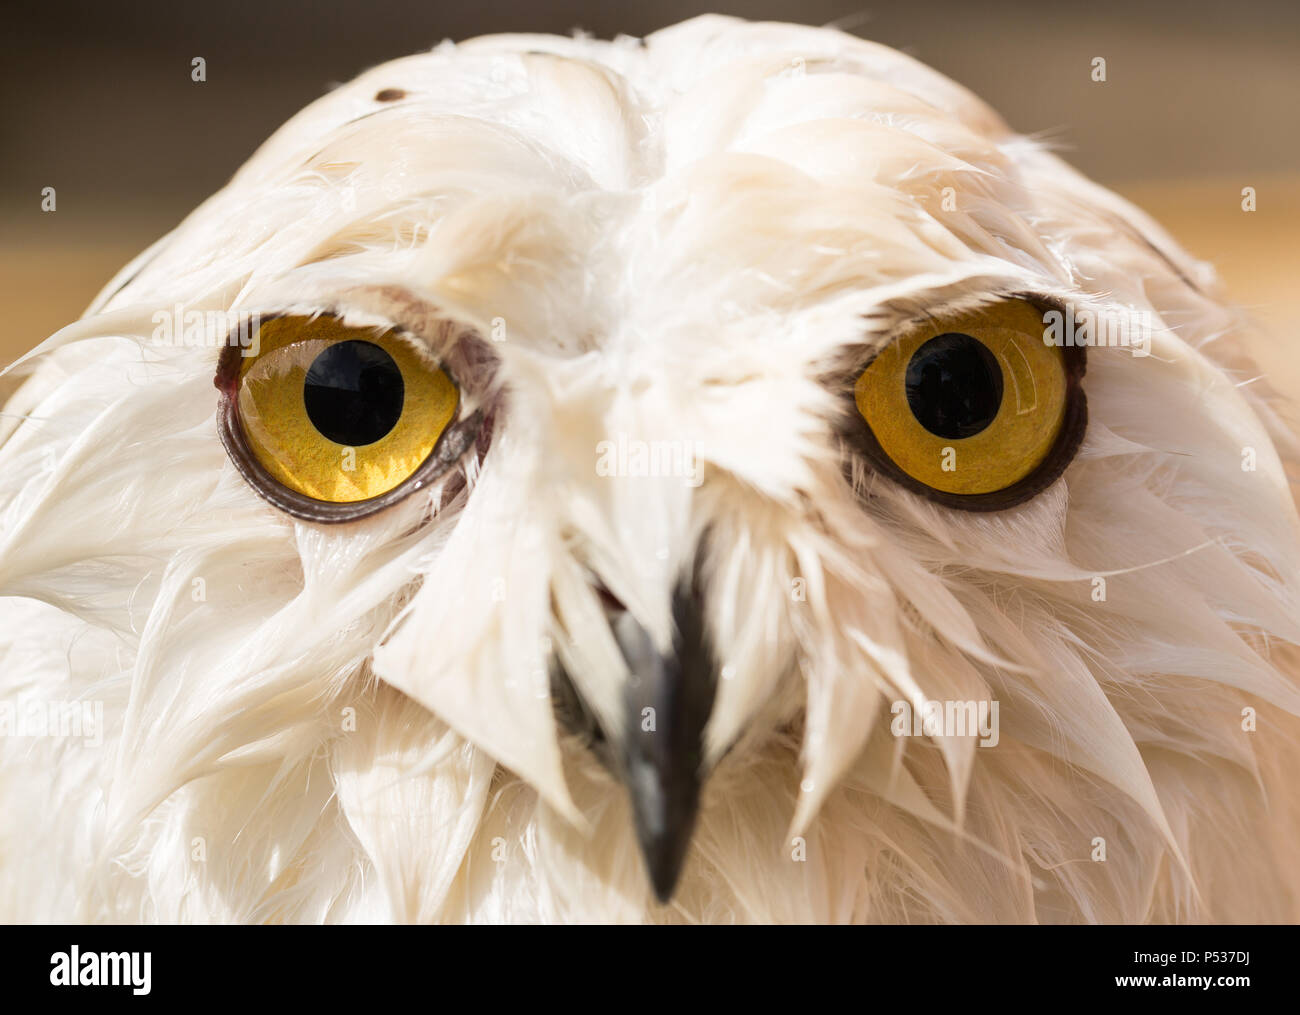 wet snowy owl drenched from shower Stock Photo